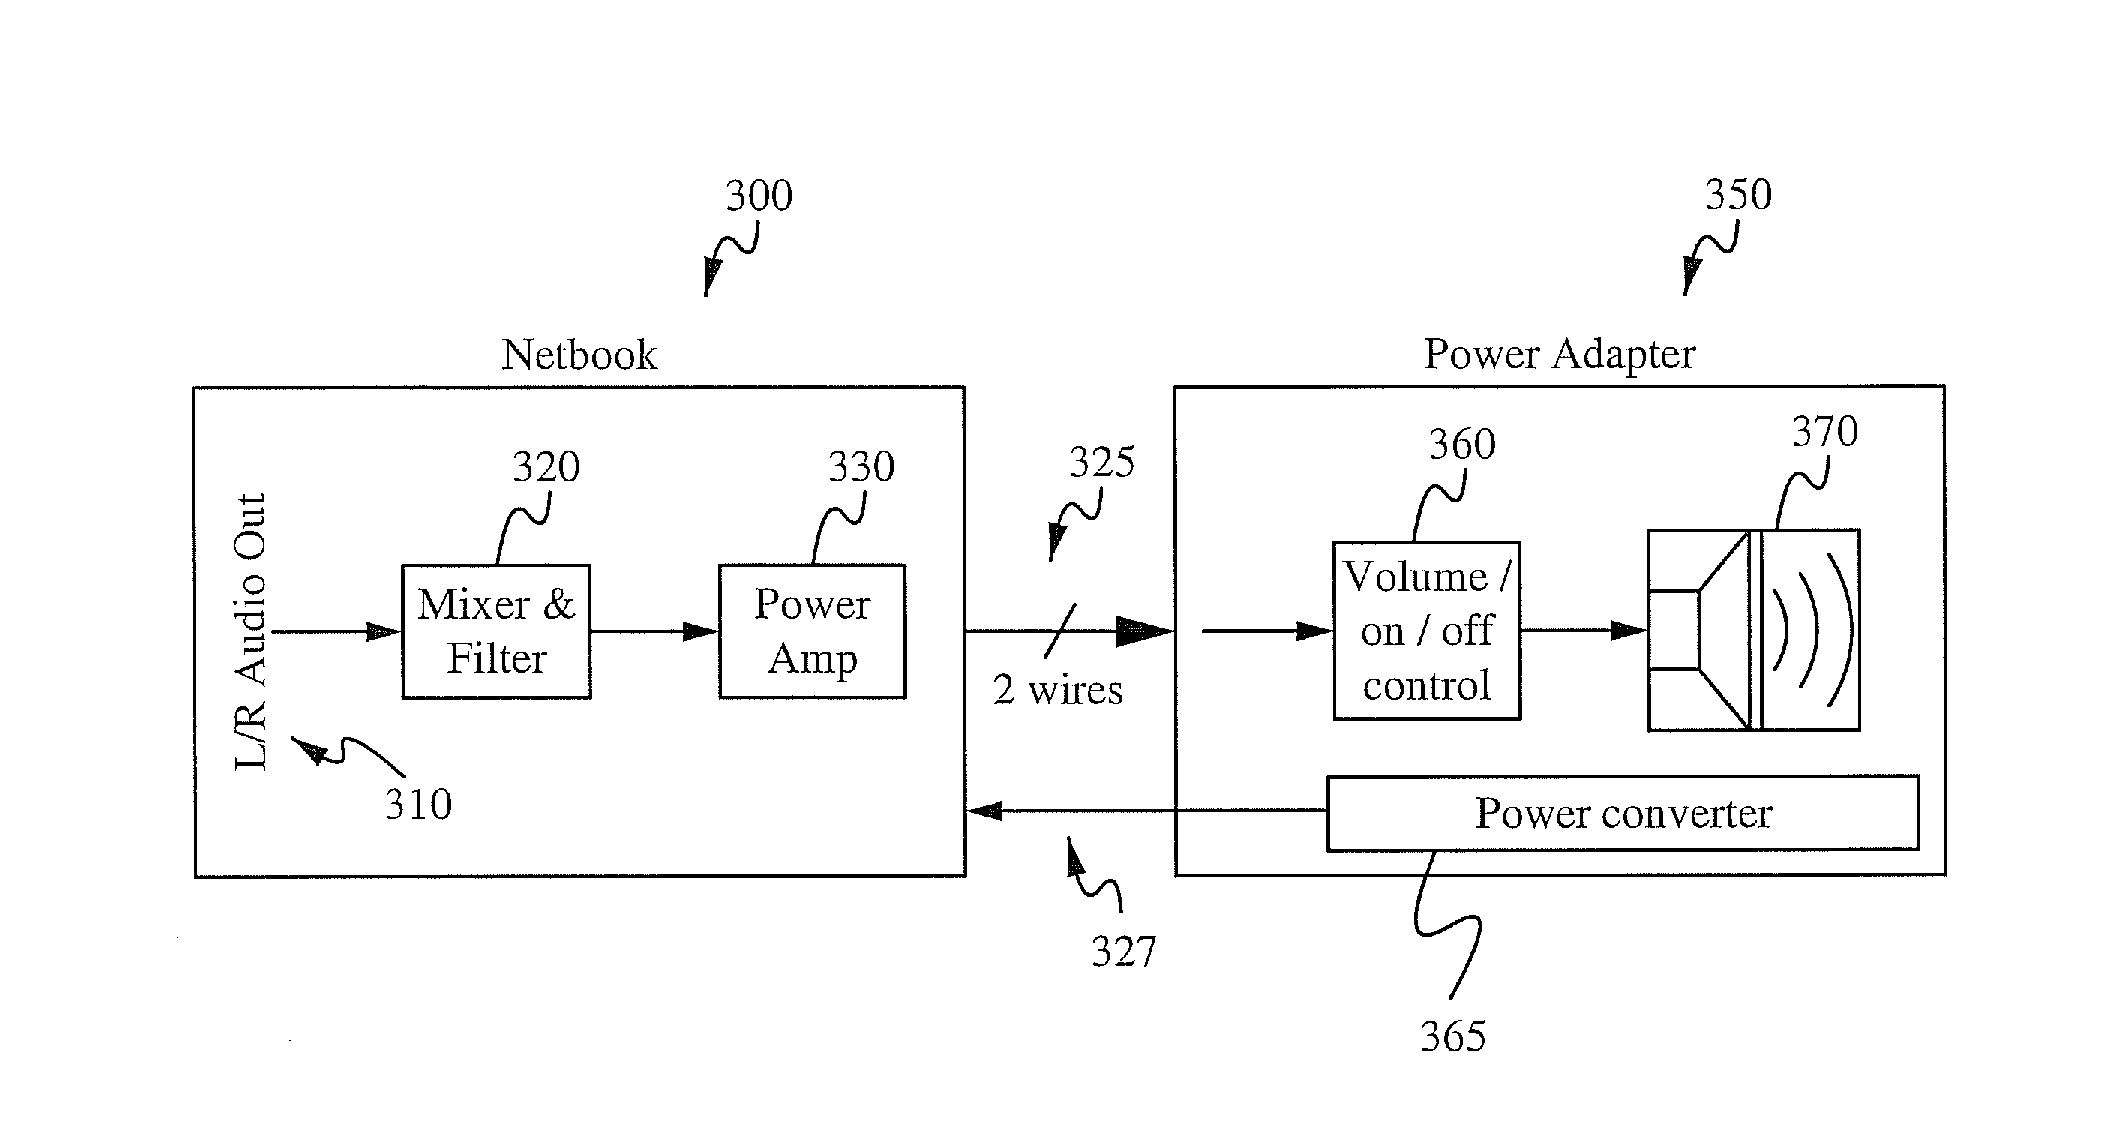 Notebook power supply with integrated subwoofer